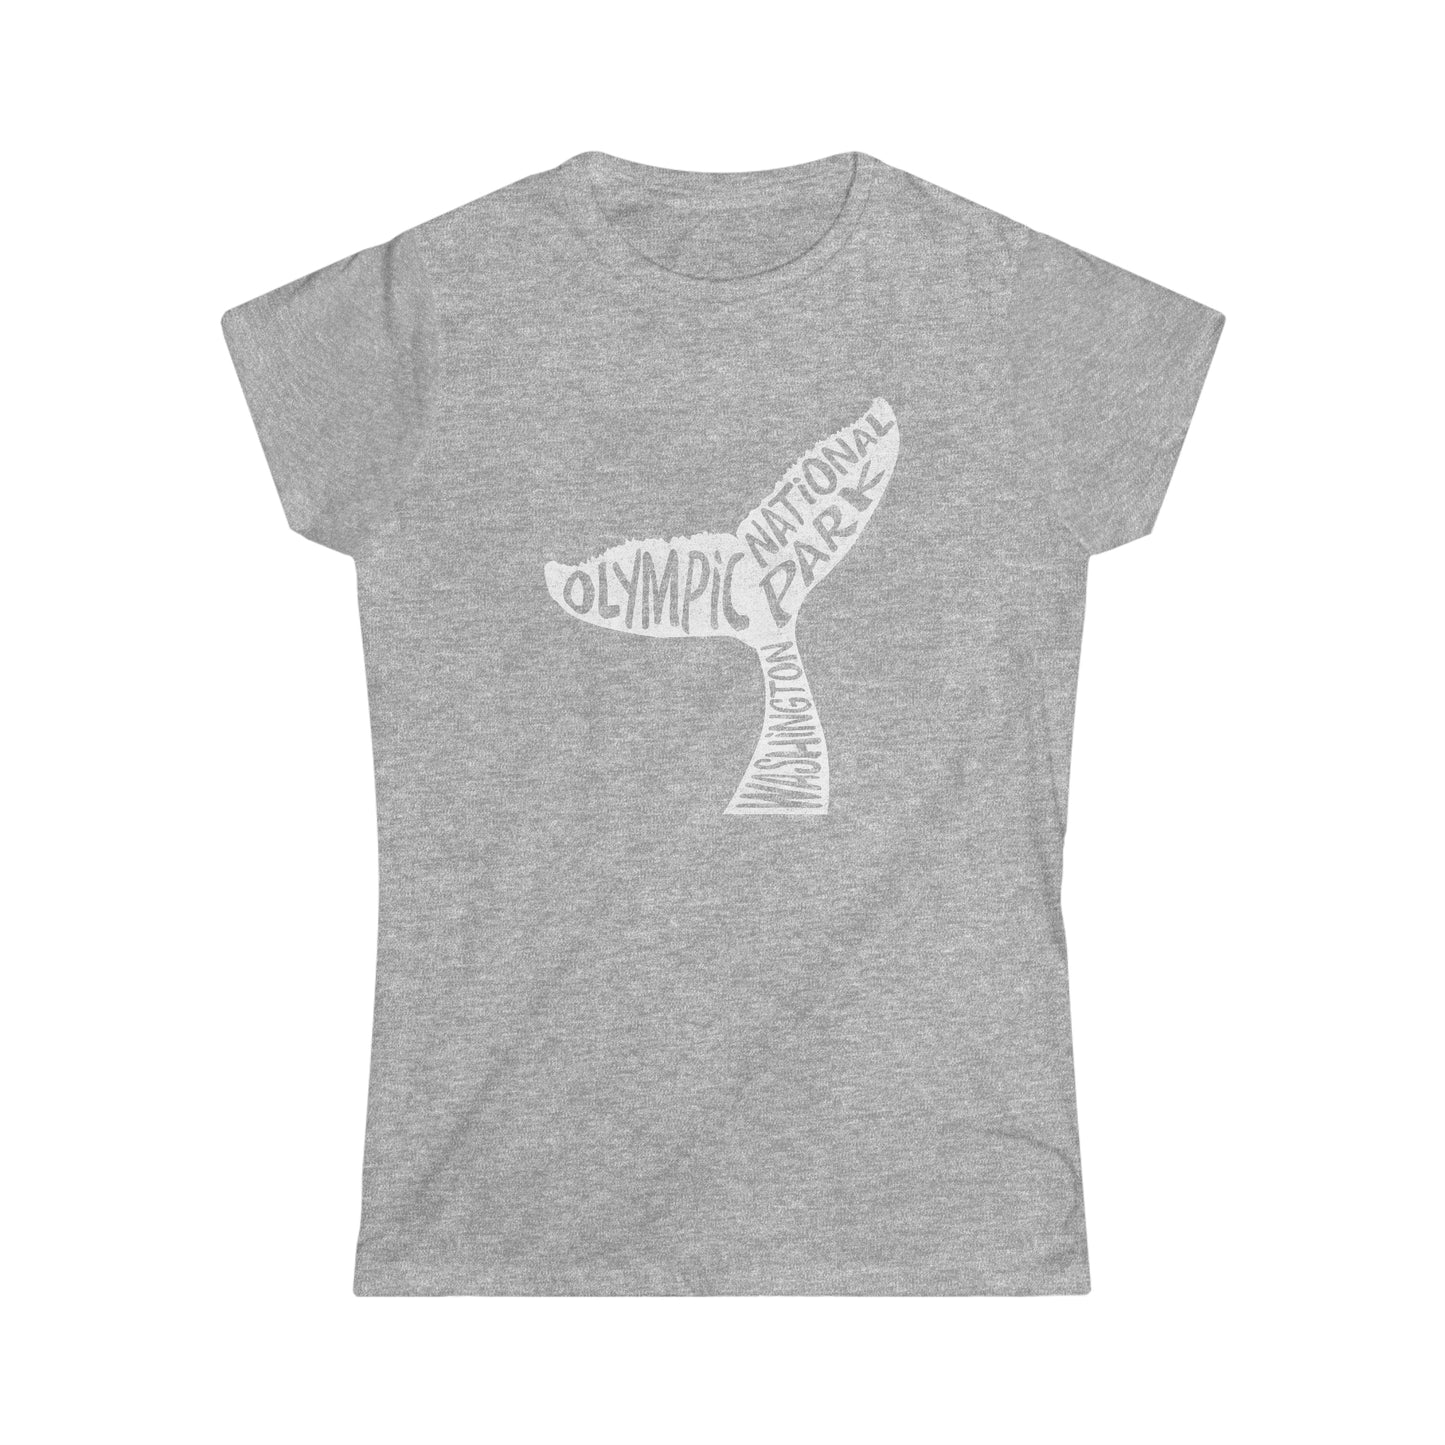 Olympic National Park Women's T-Shirt - Whale Tail